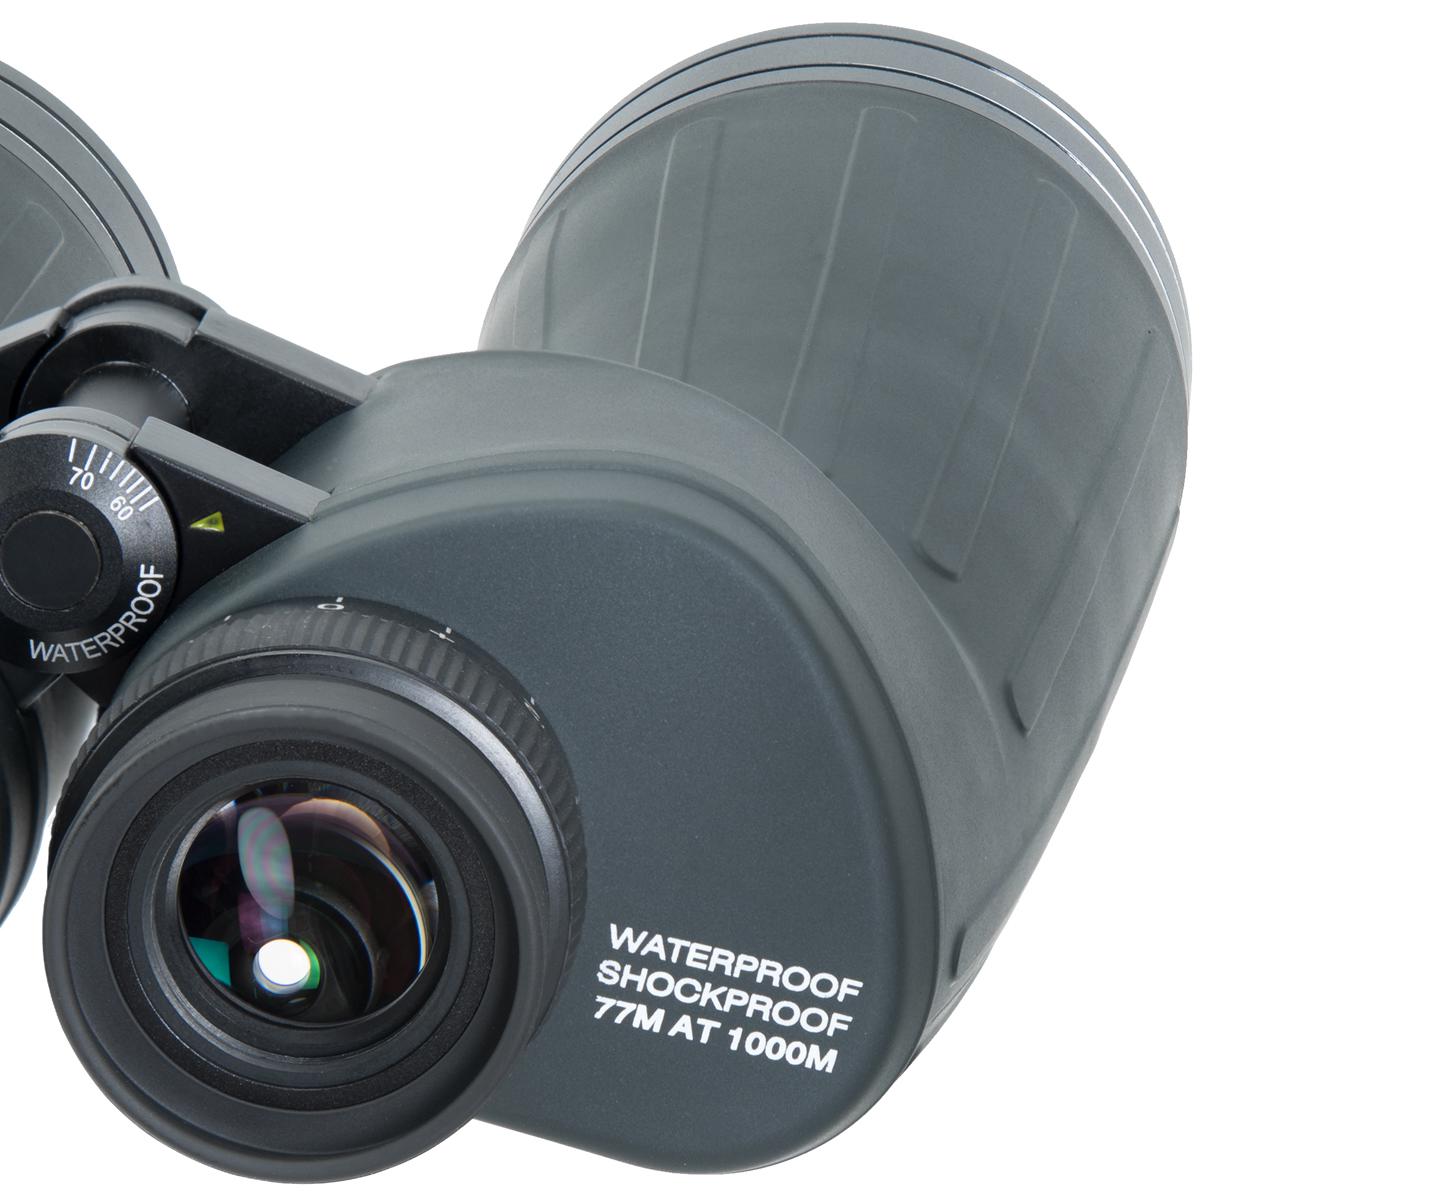  The 15x70MX outdoor binoculars from Teleskop-Service offer great observation through the two large lenses and it is weatherproof [EN] 